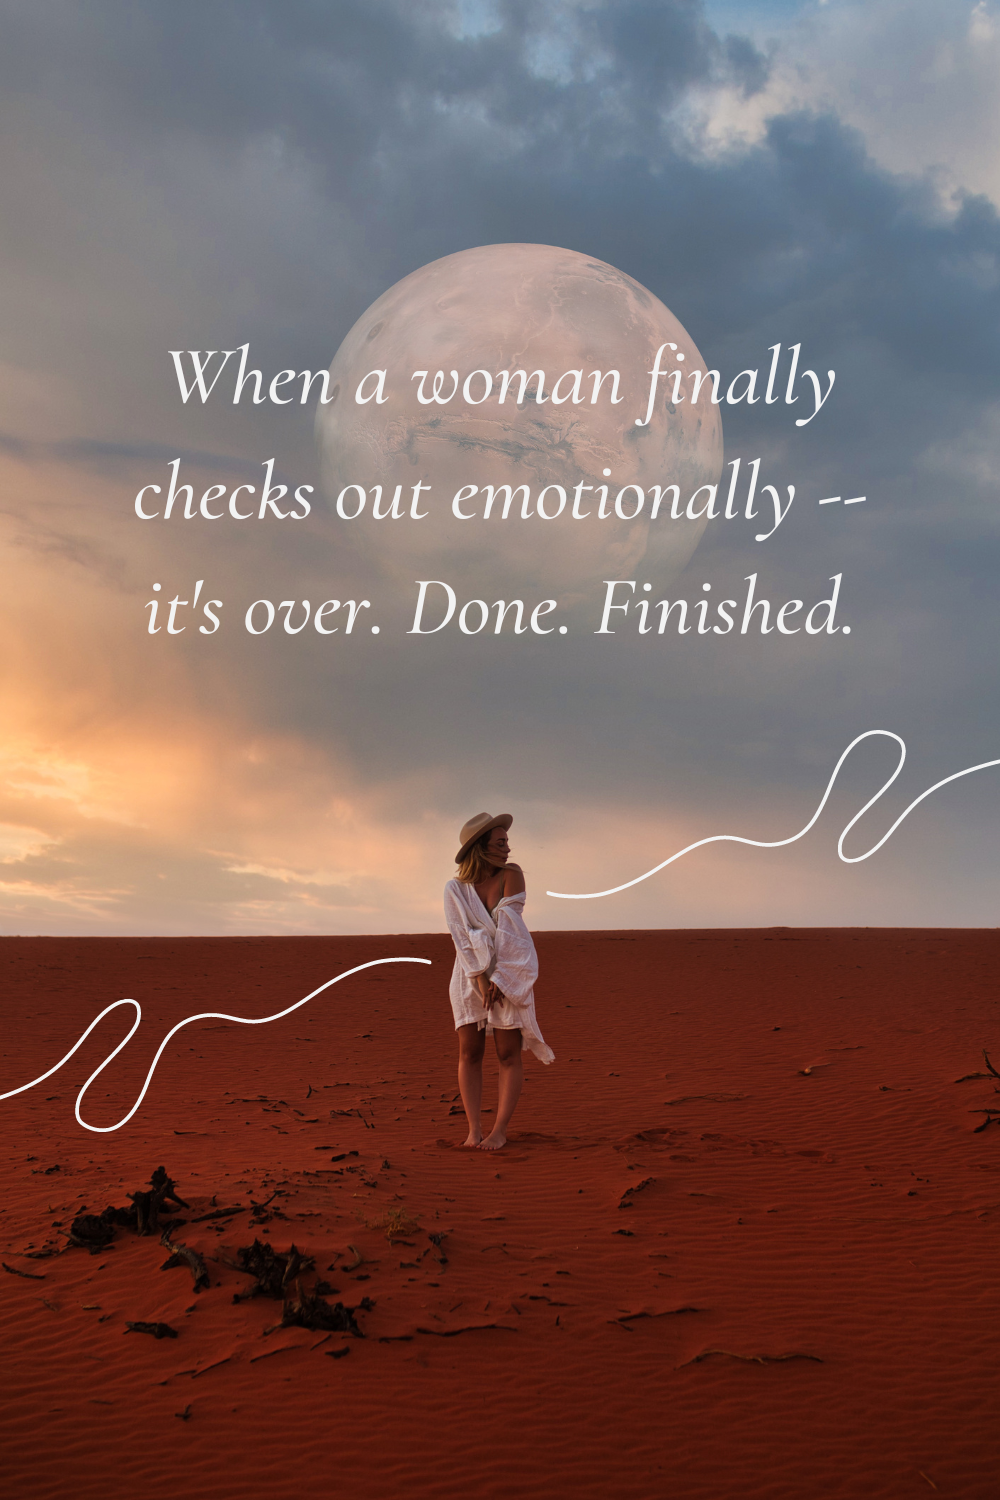 When a woman finally checks out emotionally -- it's over.